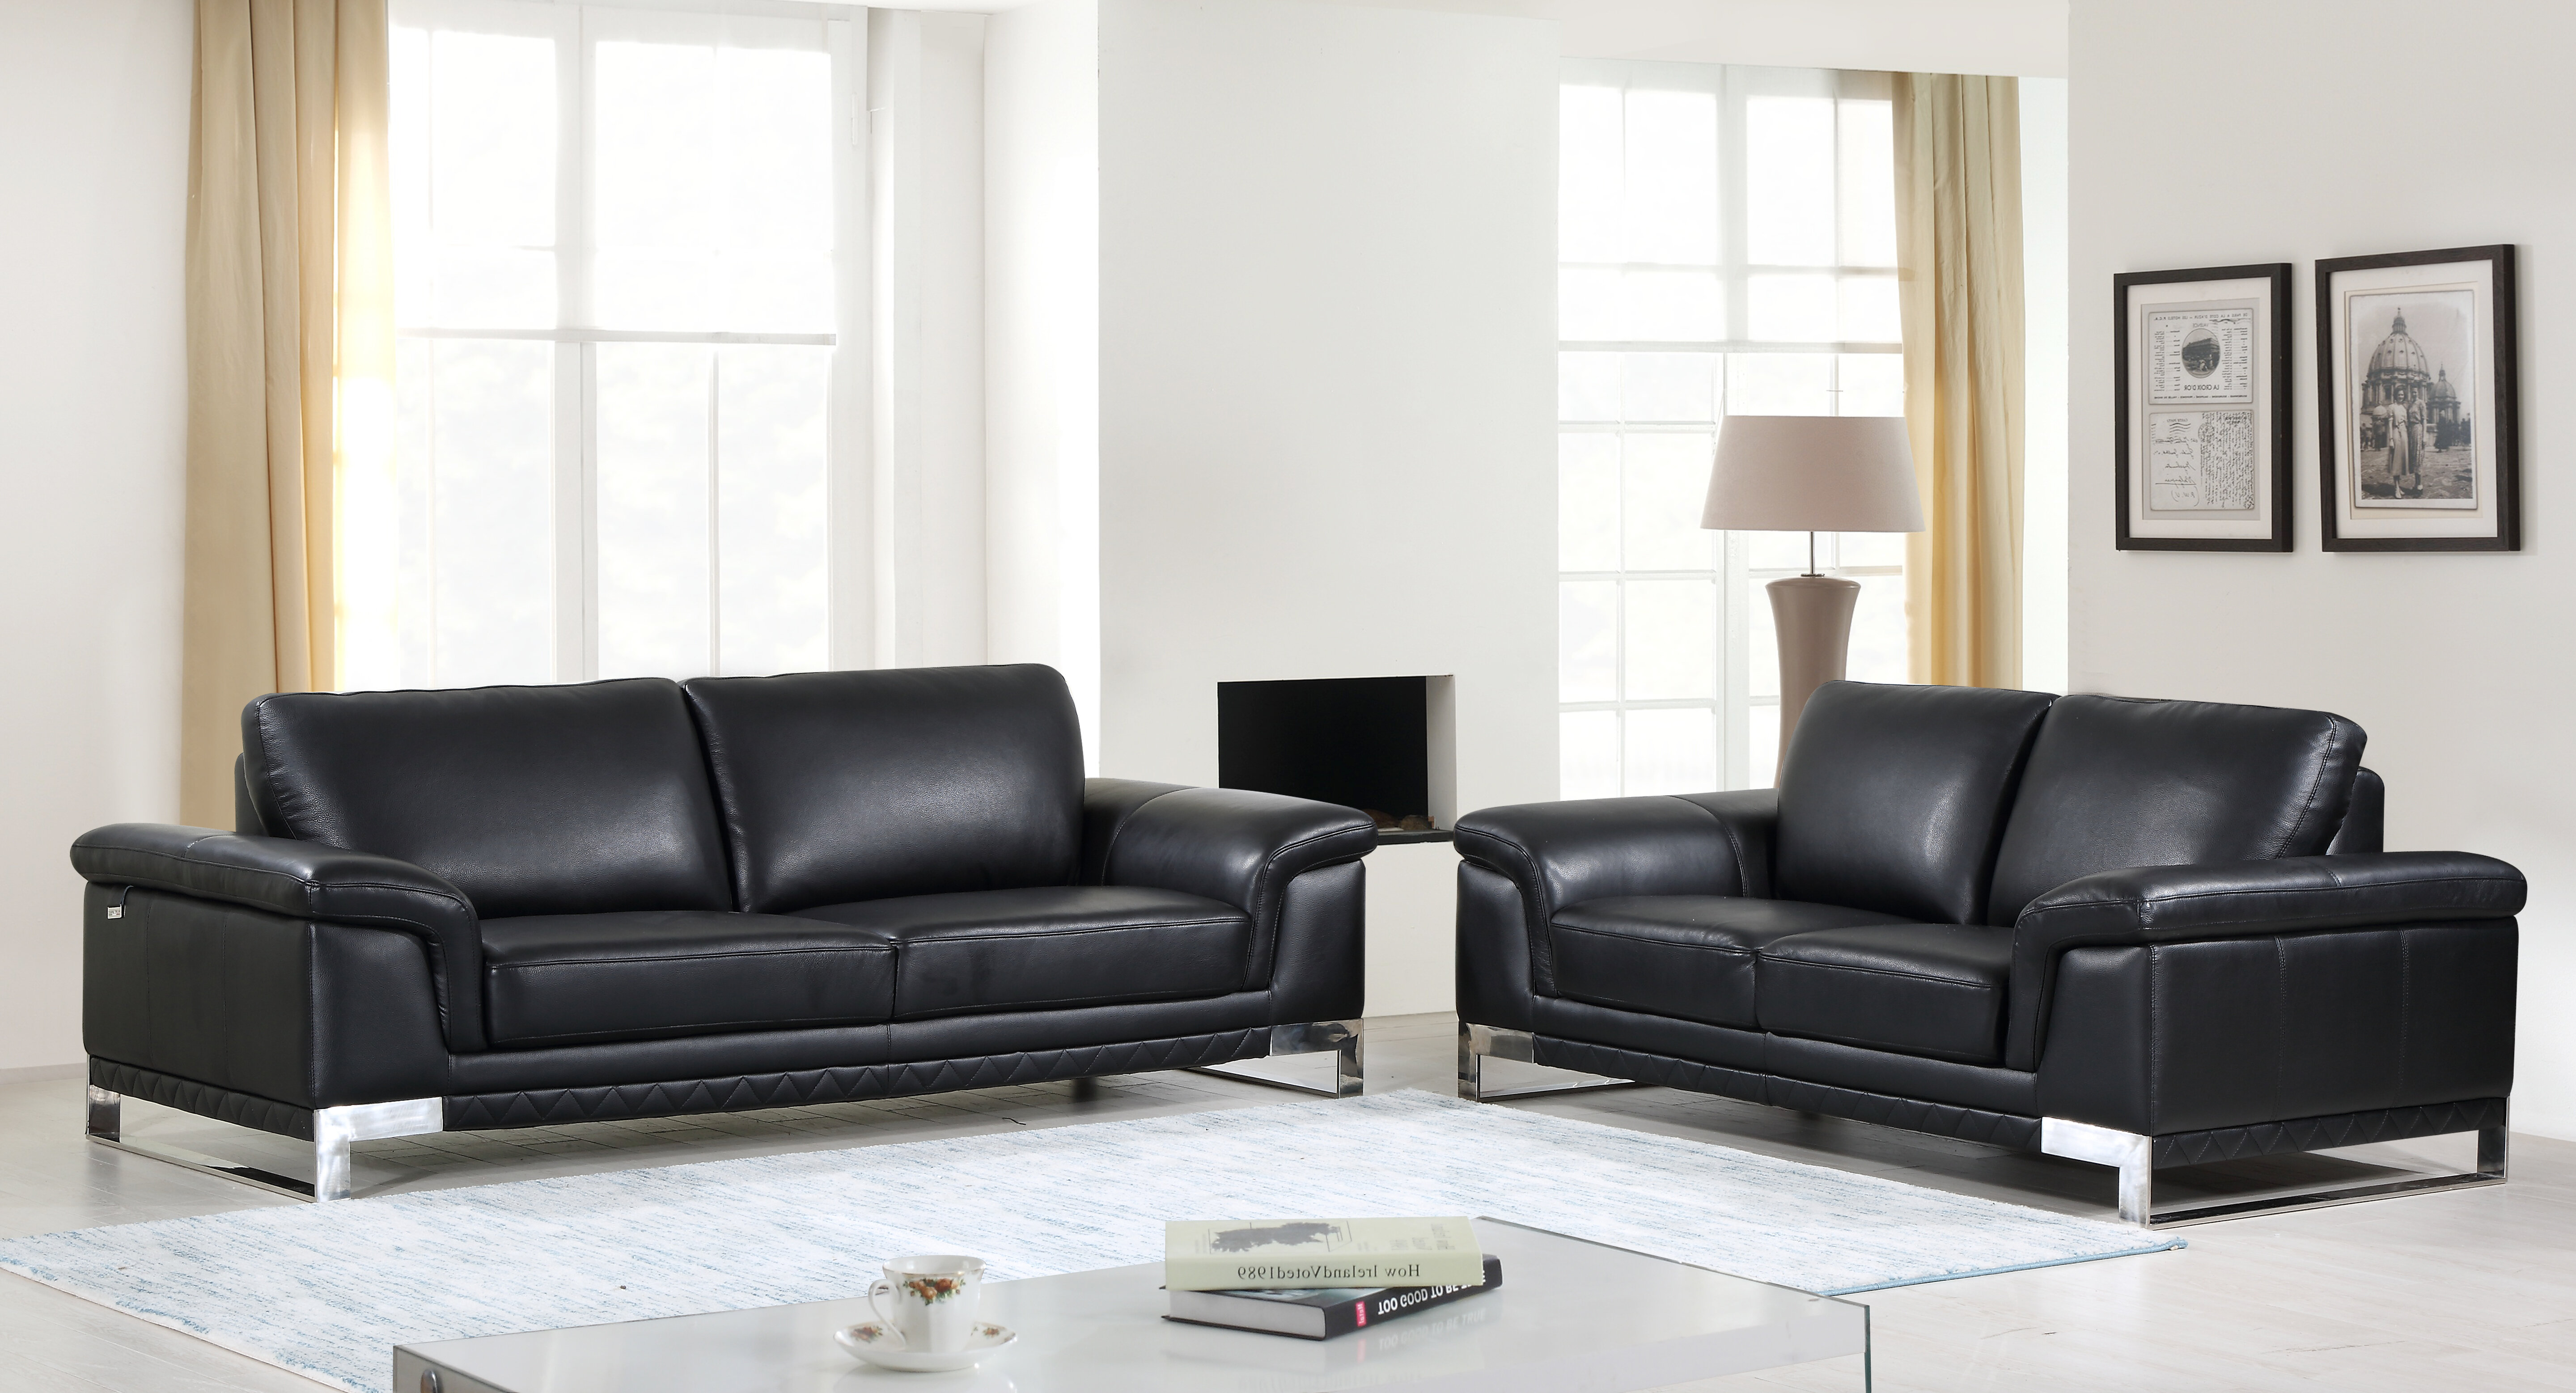 leather living room sets rounded